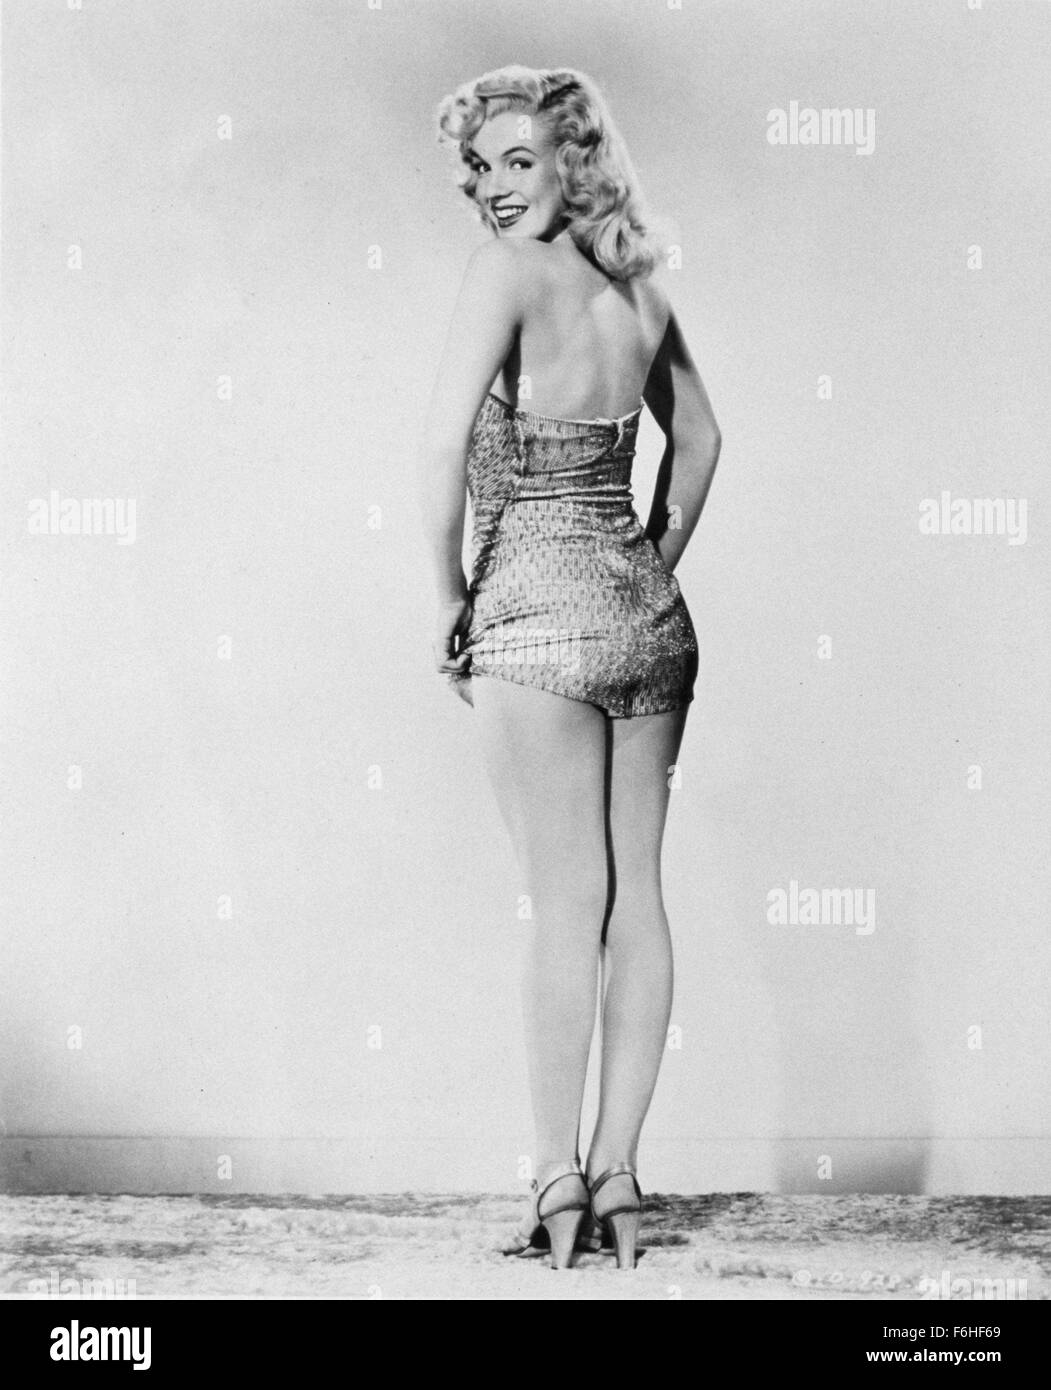 1948, Film Title: LADIES OF THE CHORUS, Director: PHIL KARLSON, Studio: COLUMBIA, Pictured: 1948, BATHING SUIT, CLOTHING, MARILYN MONROE, PIN-UPS, HANDS ON HIPS, PORTRAIT, STUDIO, LOOKING OVER SHOULDER. (Credit Image: SNAP) Stock Photo